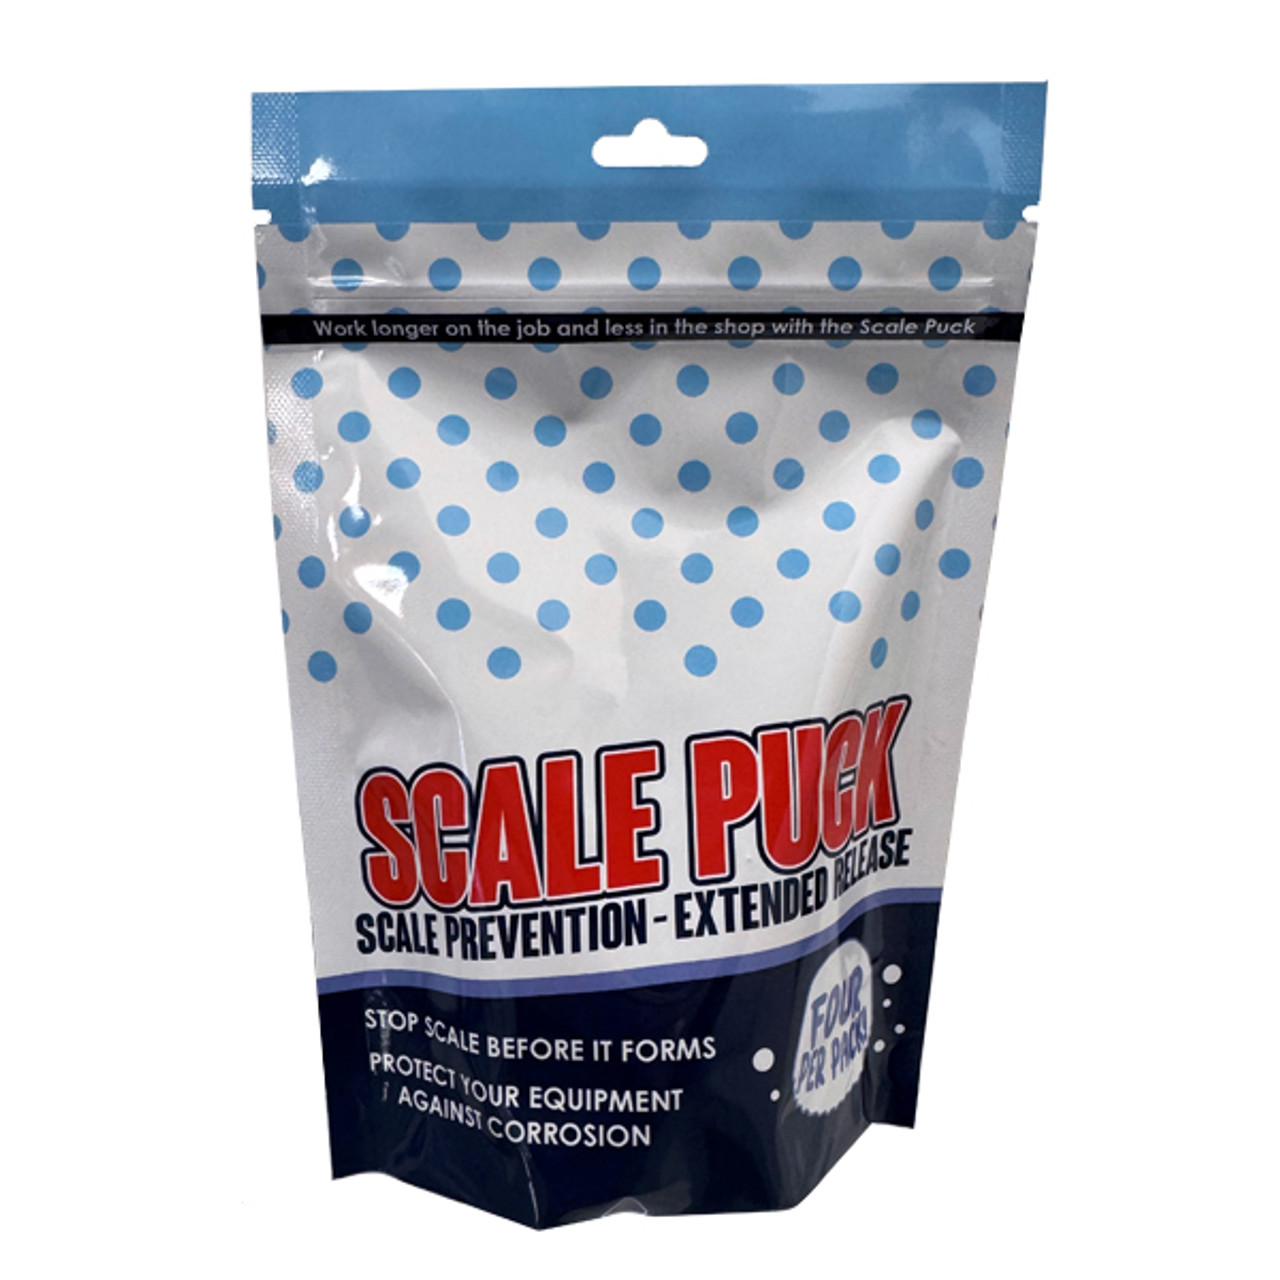 Scale Puck - Scale Prevention Four Pack